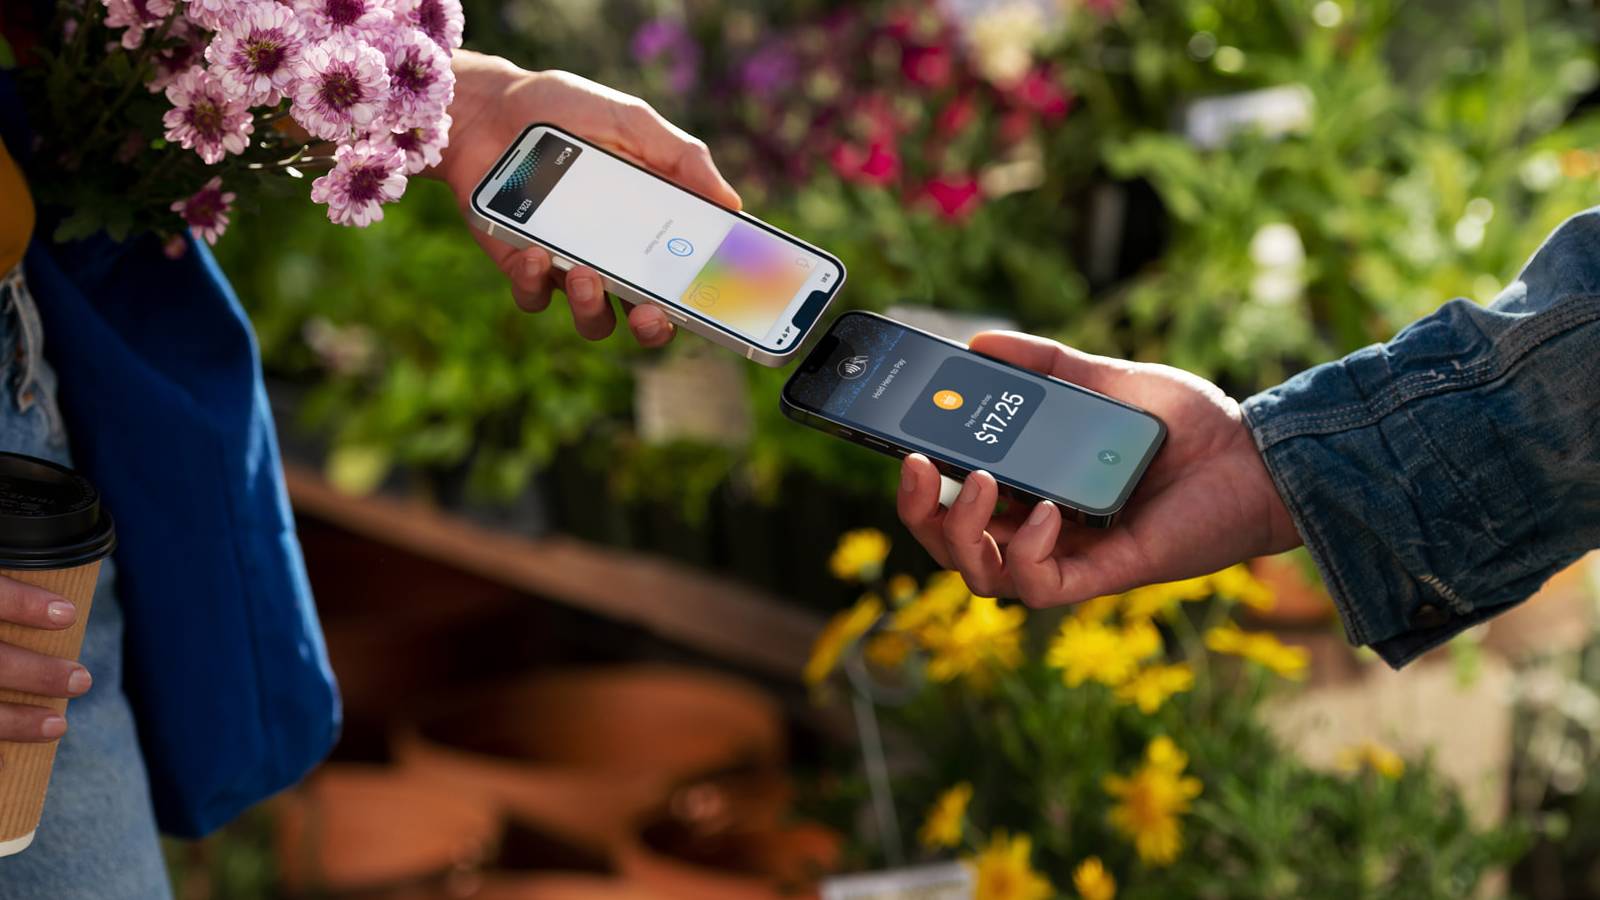 Square Announces Tap to Pay on iPhone Early Access Program